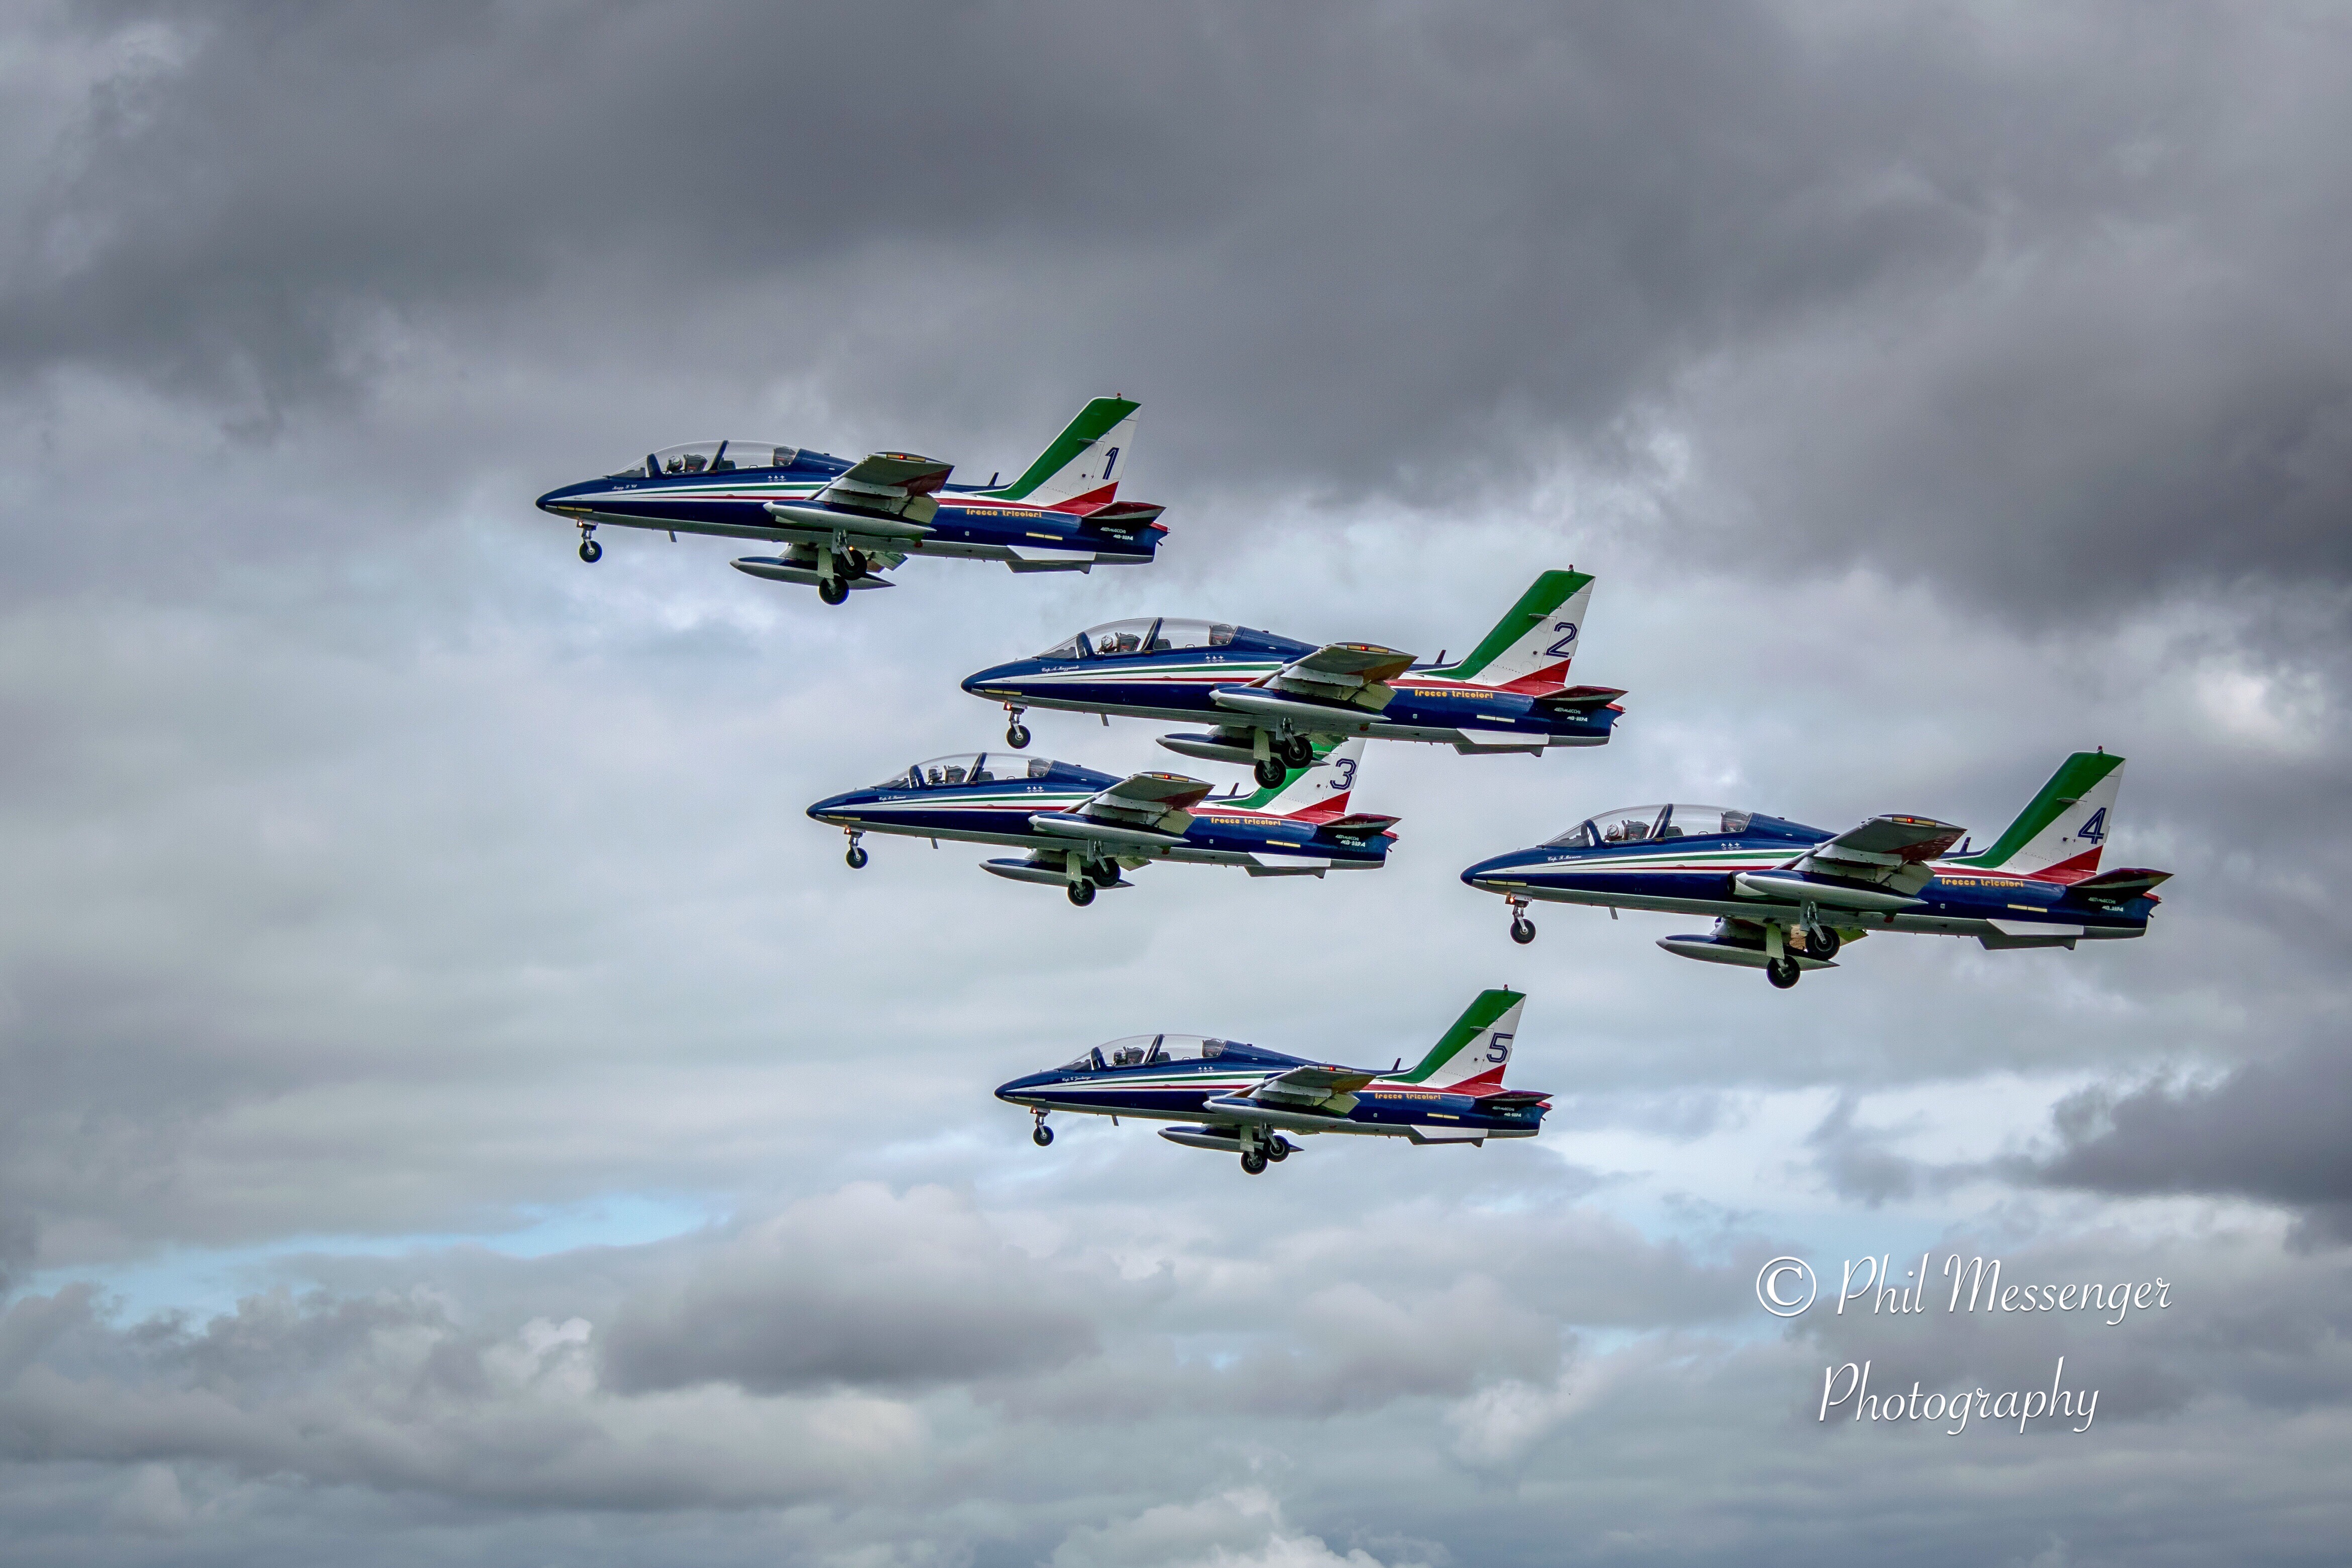 Italian Airforce Frecce Tricolori taking to the sky At the Royal International Air Tattoo 2019.